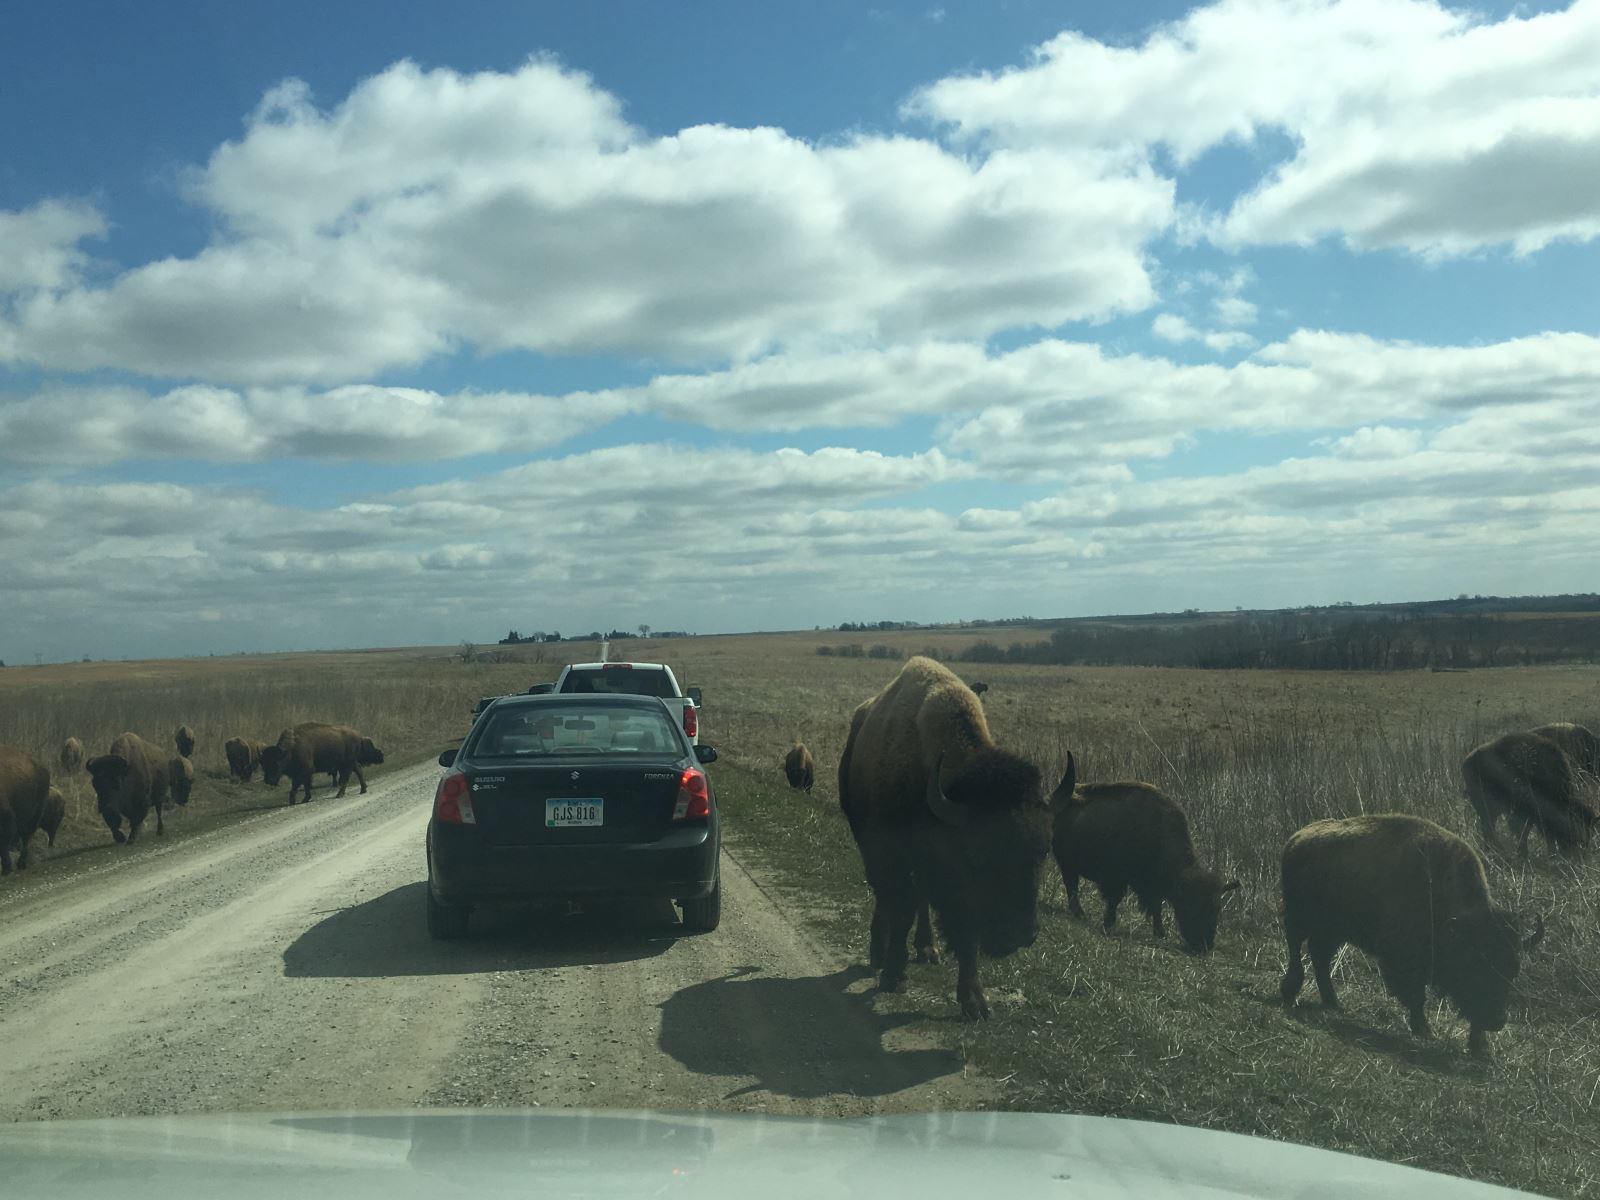 Buffaloes on the road at the Neal Smith Wildlife Refuge